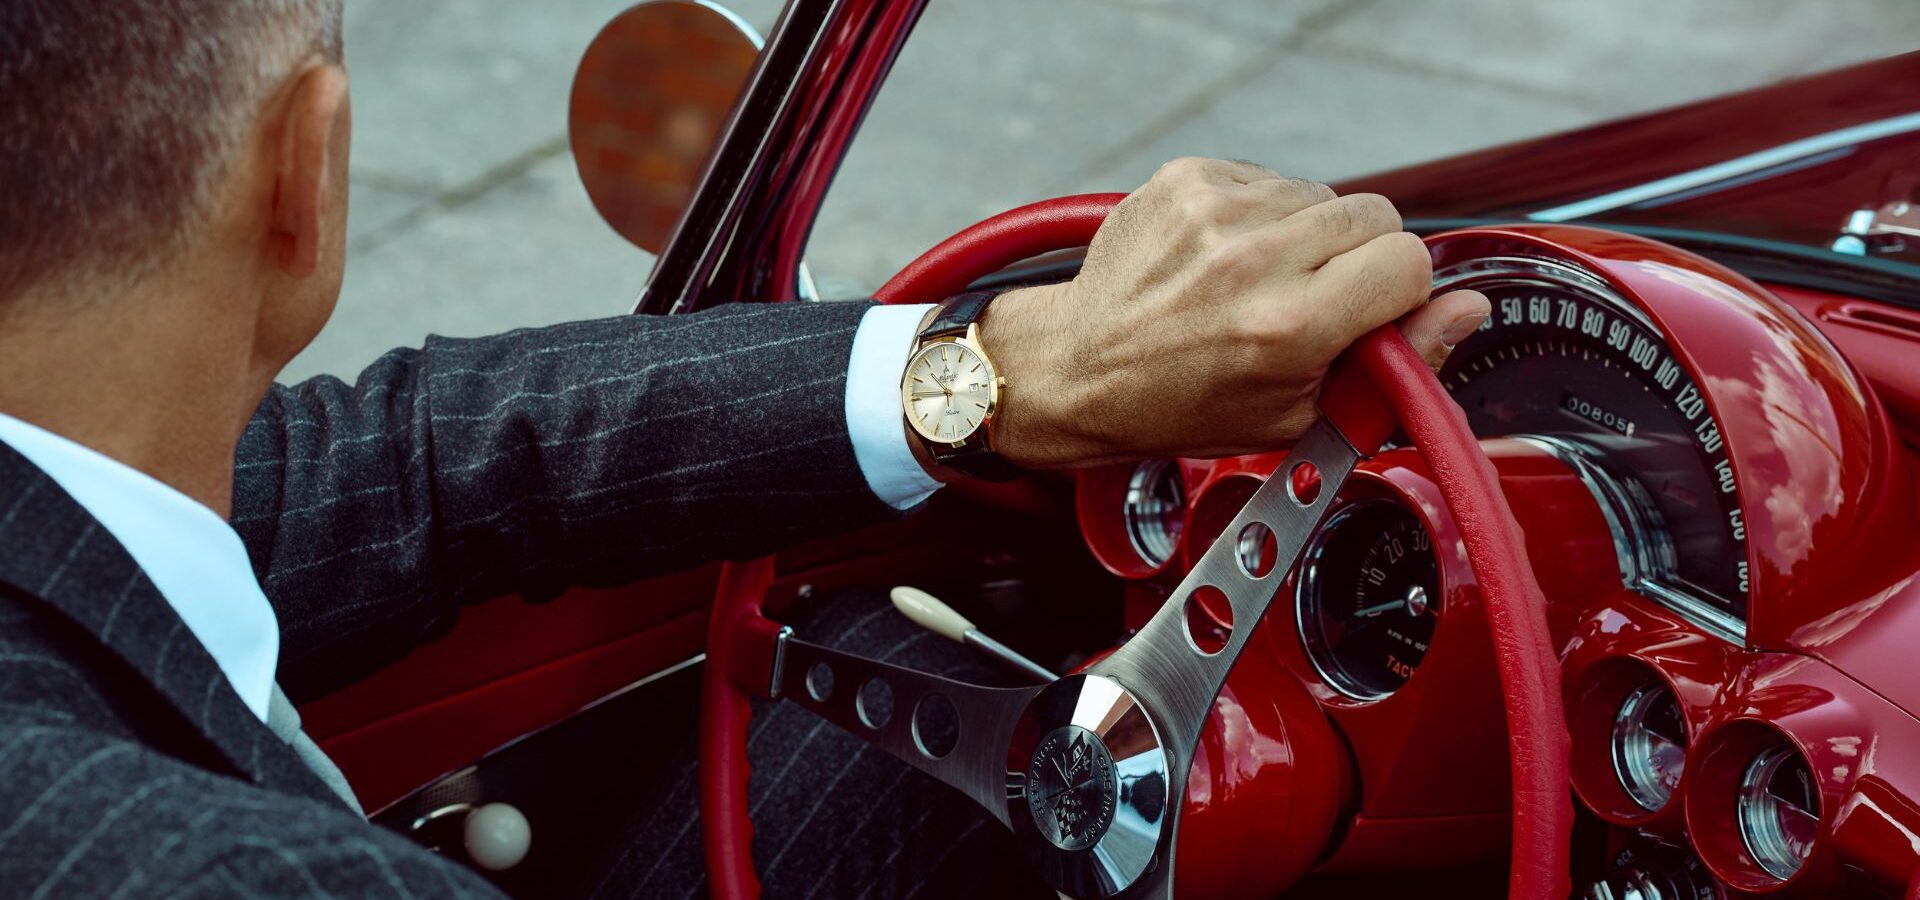 Atlantic Watches for Him | Swiss Made since 1888